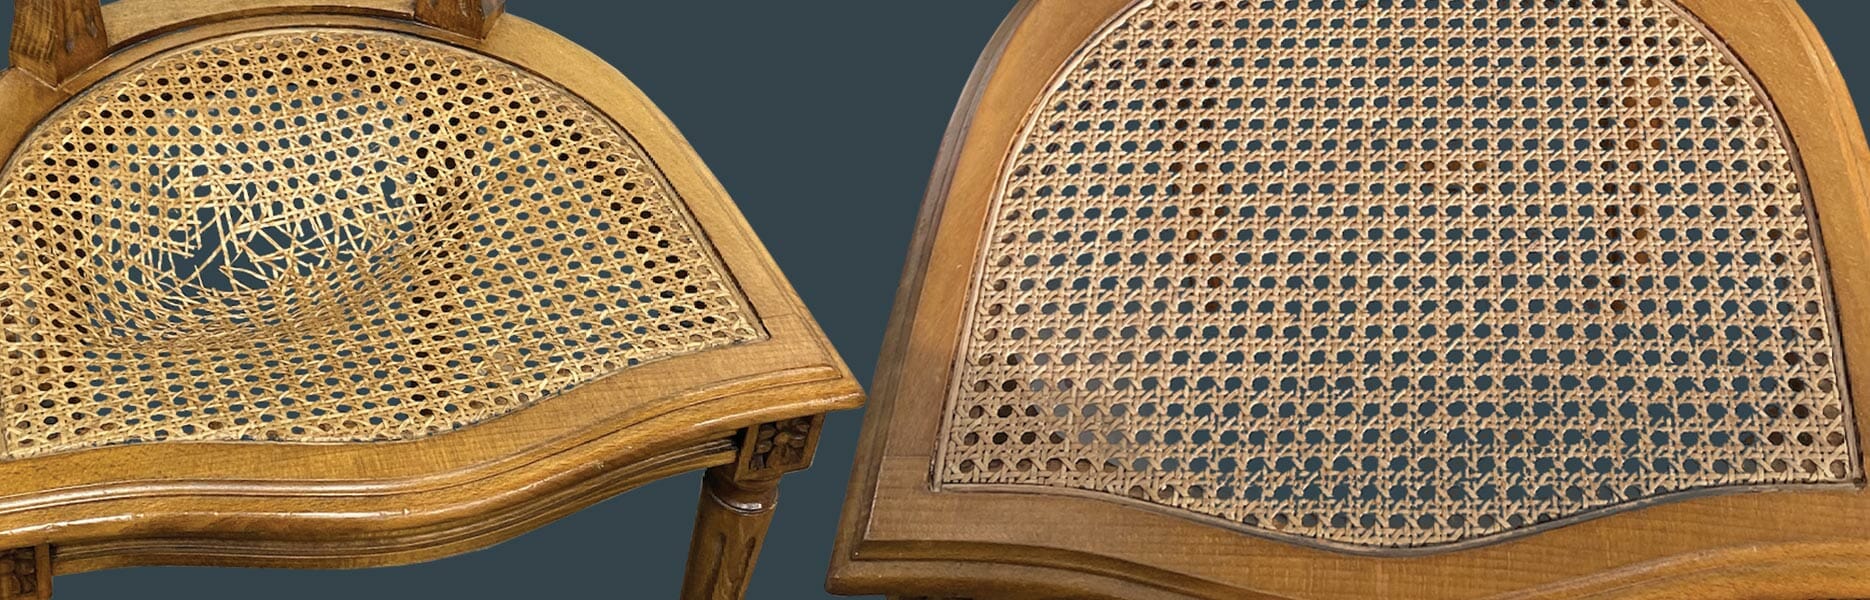 cane chair before and after restoration